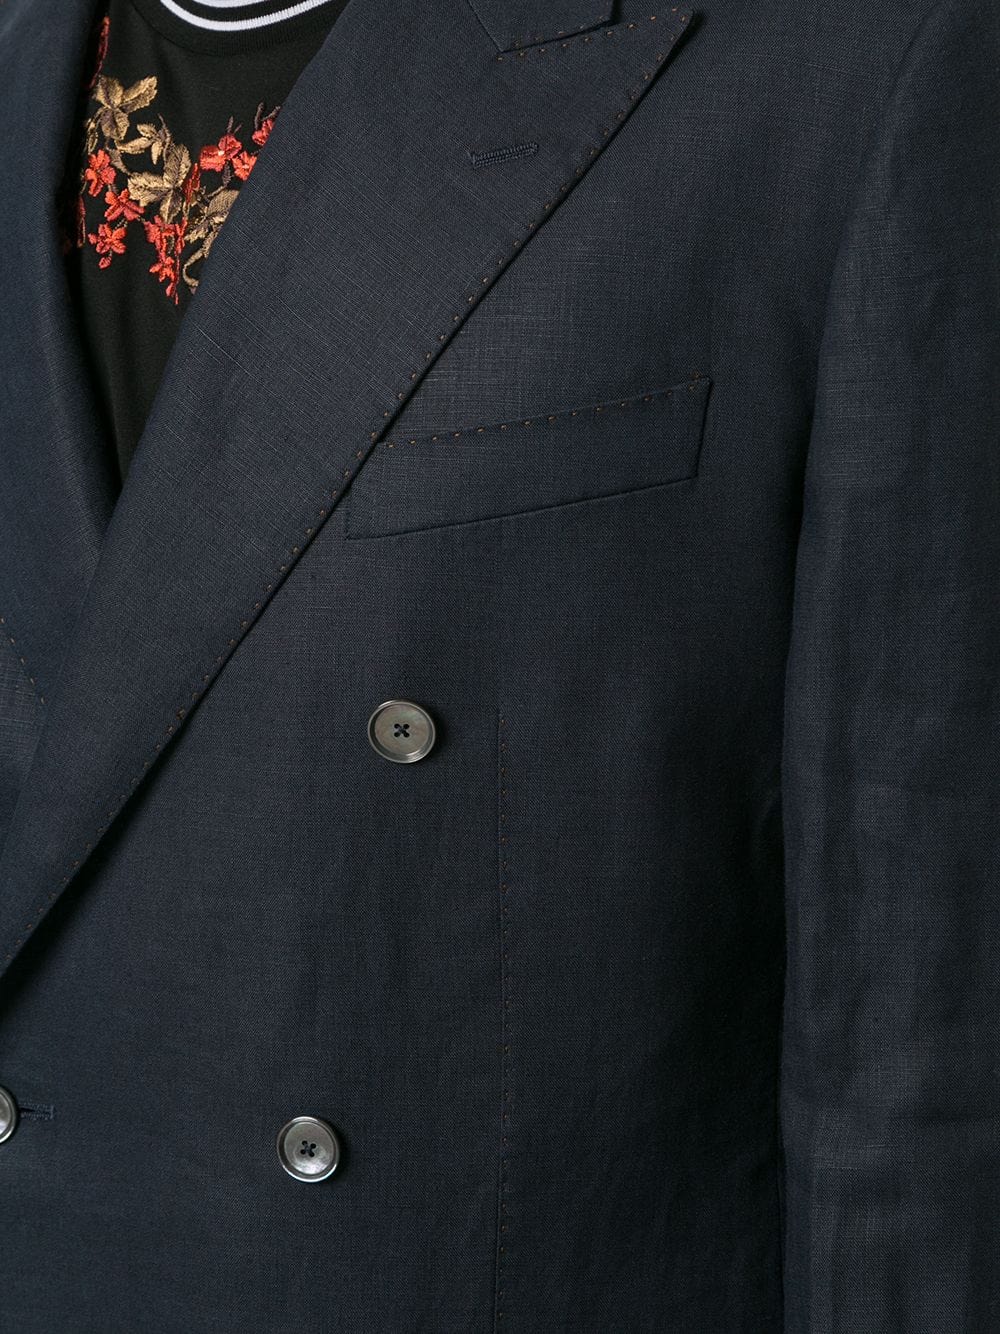 Dolce & Gabbana Double-Breasted Suit Jacket